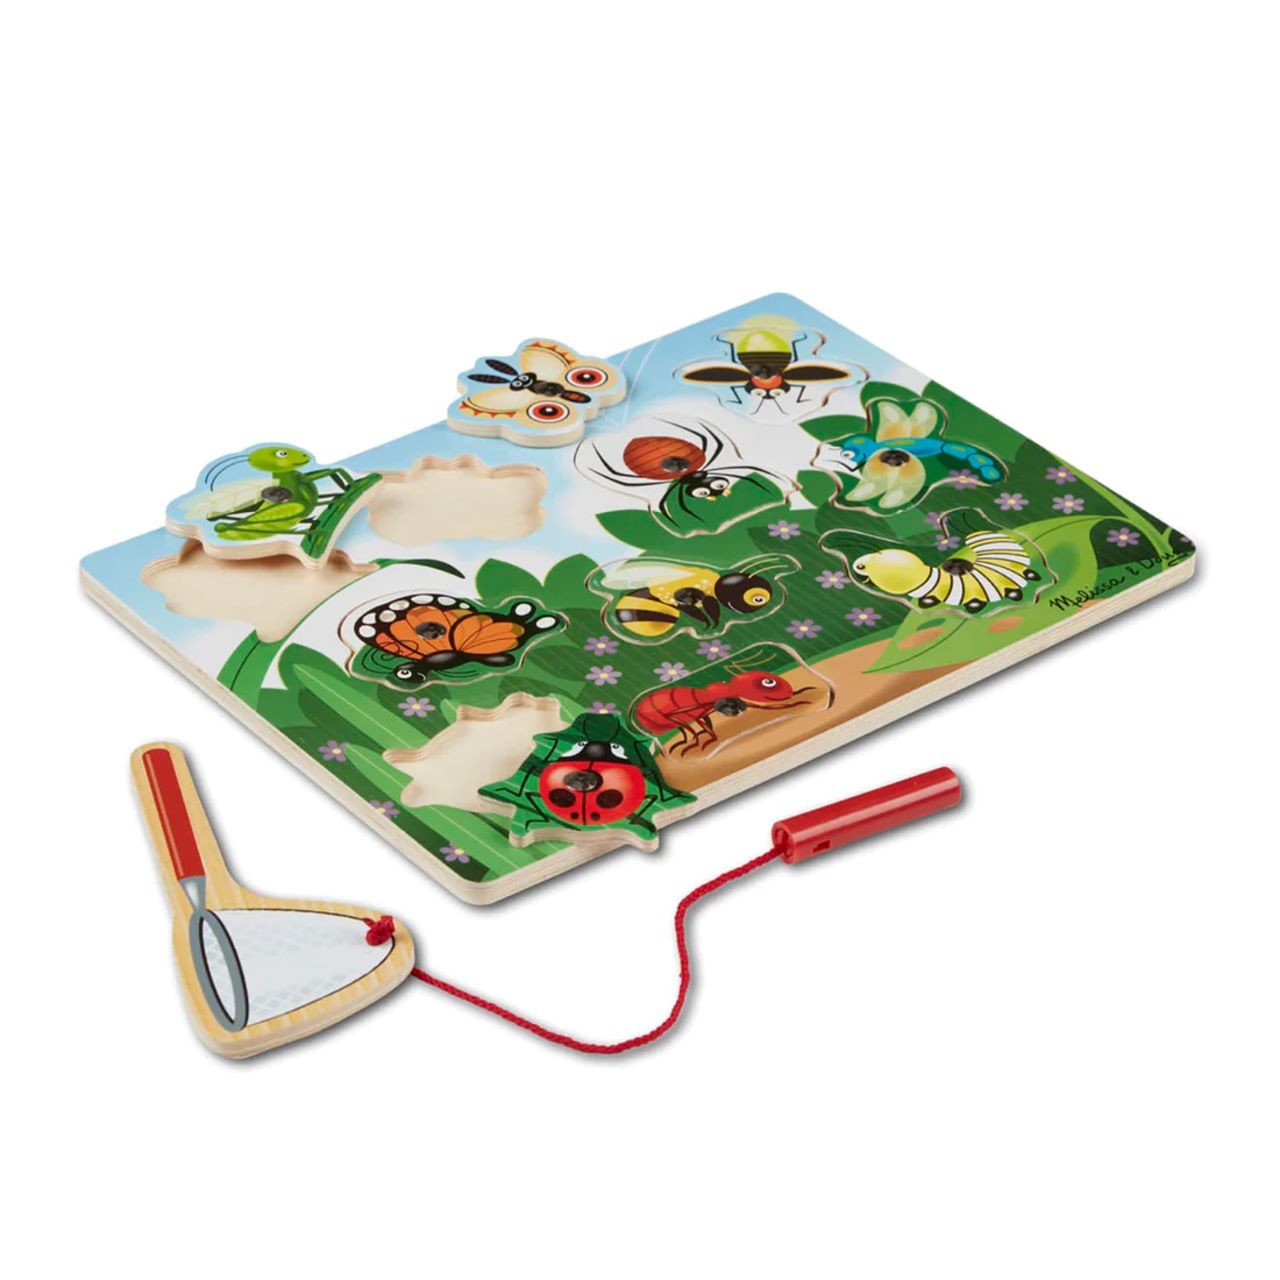 https://cdn11.bigcommerce.com/s-pqt7n8/images/stencil/1280x1280/products/13216/46299/melissa-doug-wooden-bug-catching-magnetic-fishing-game1__94093.1711032277.jpg?c=2